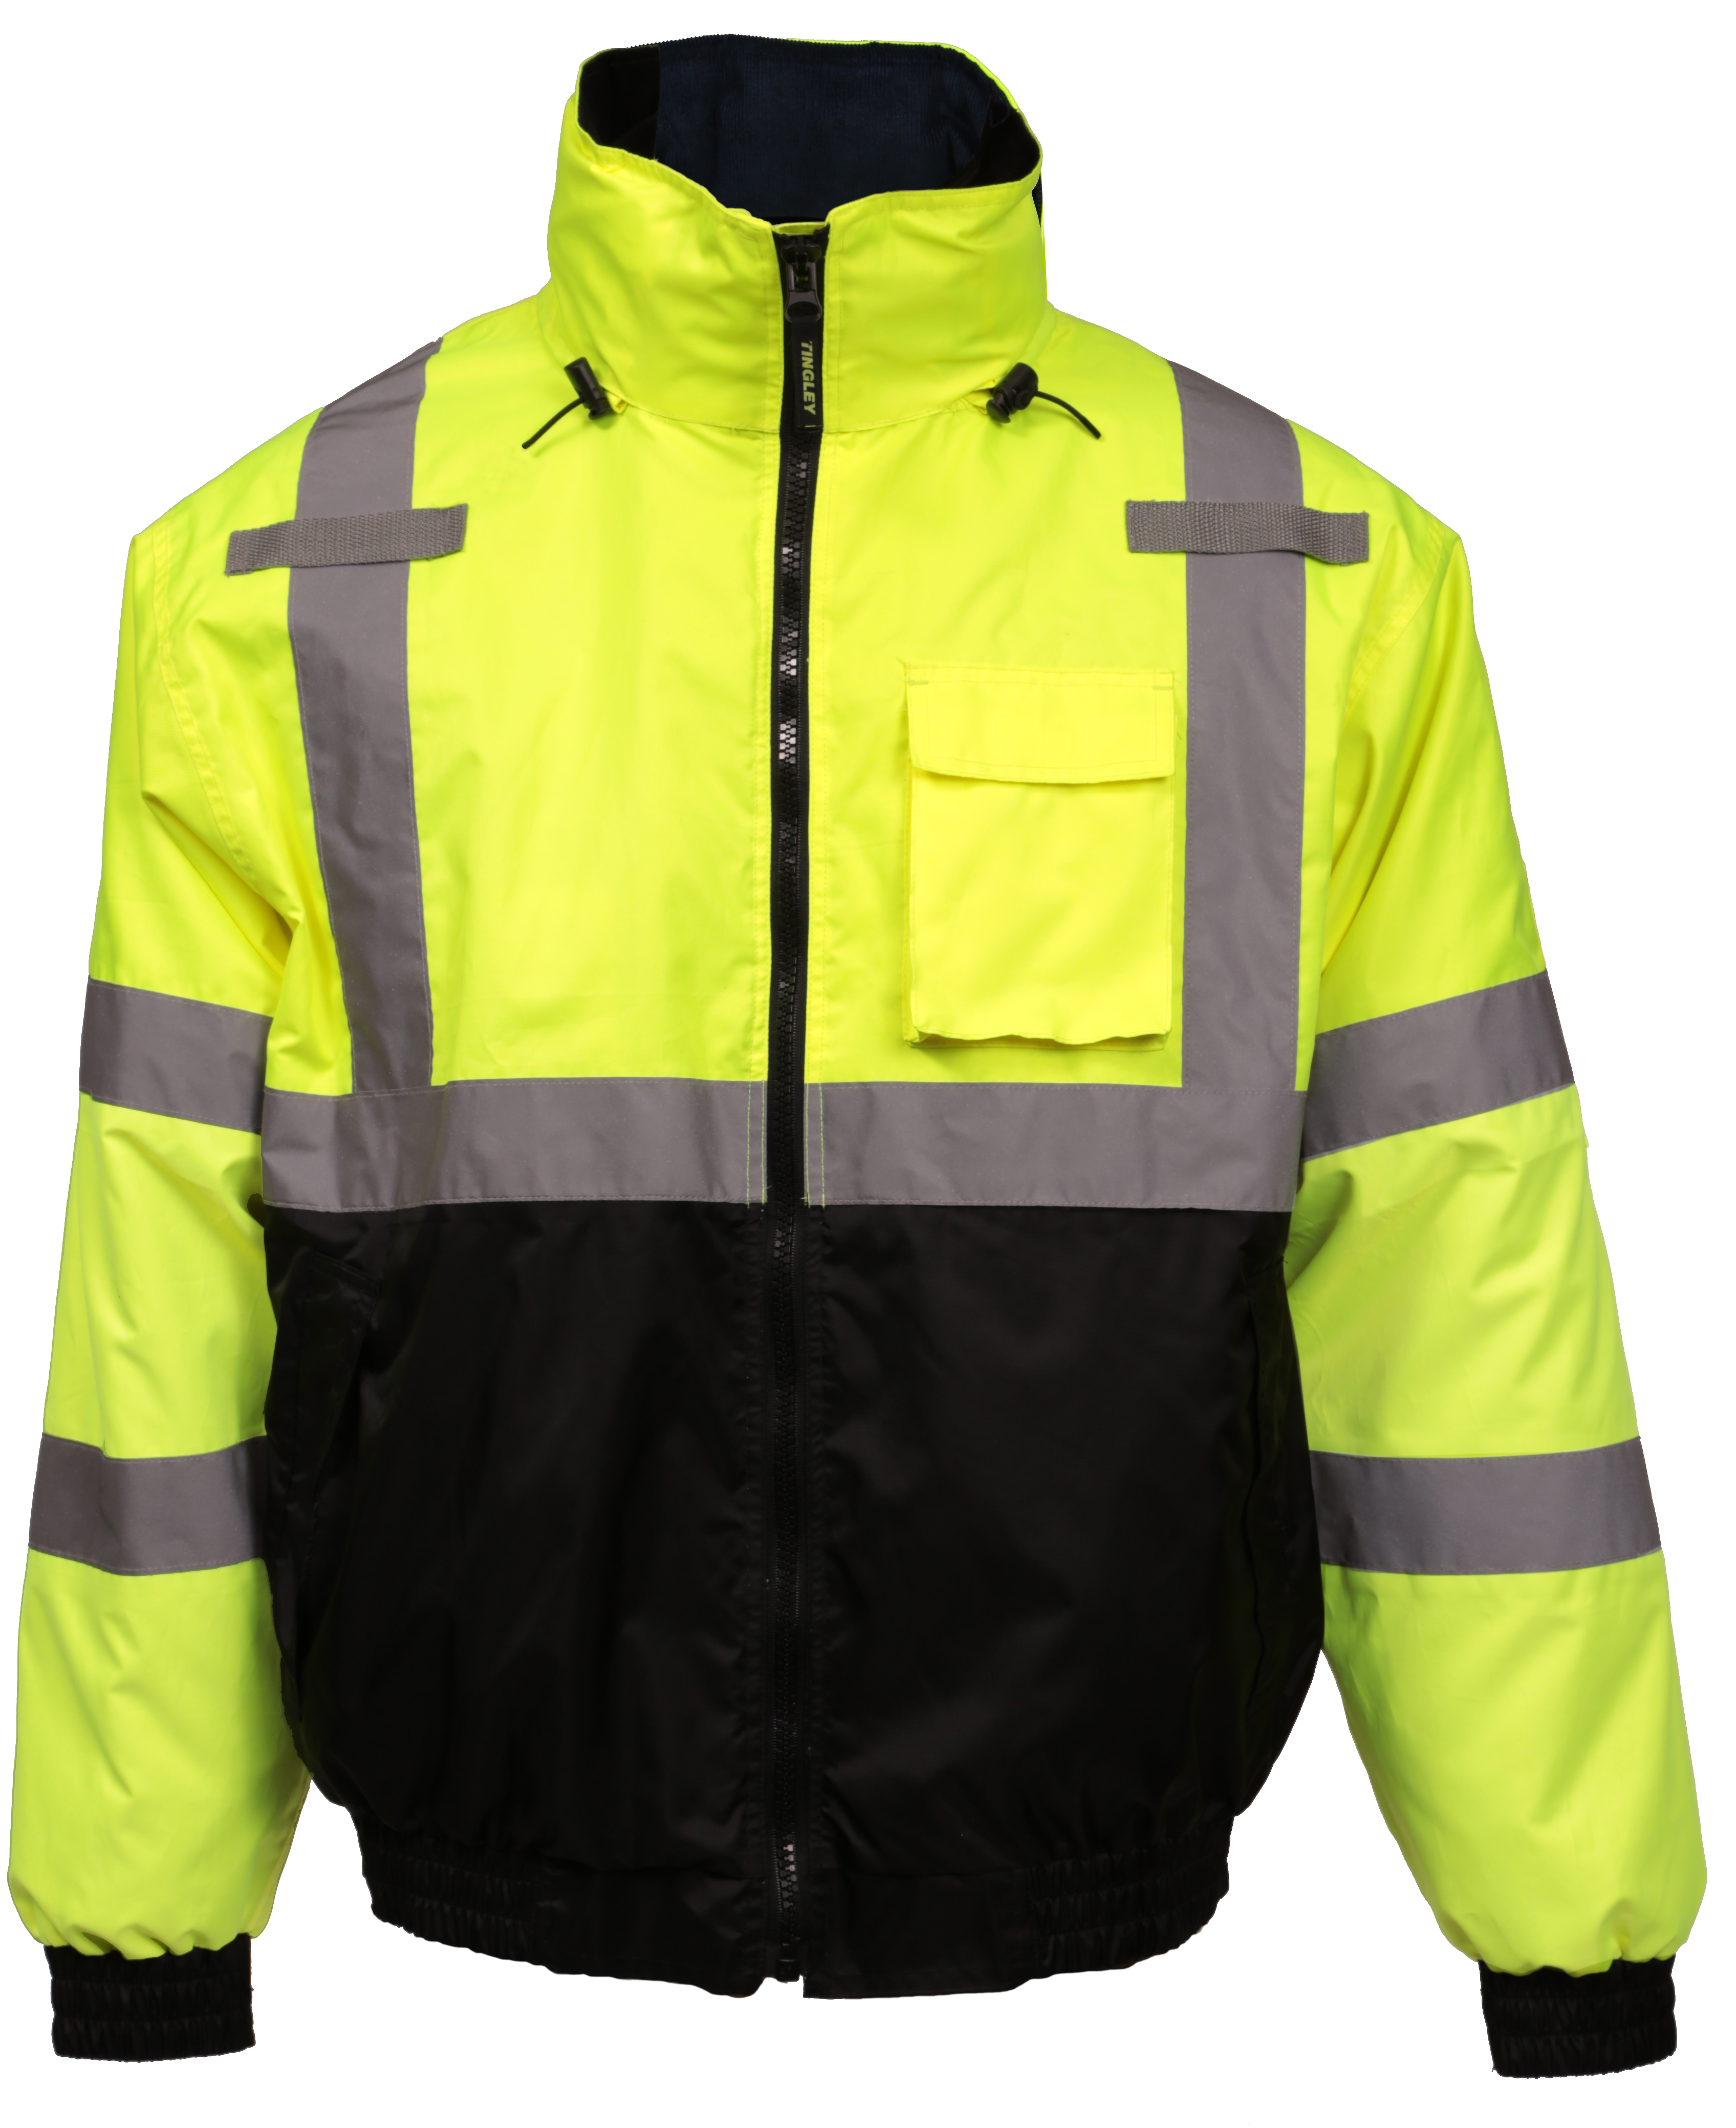 Bomber 3.1™ Jacket - Type R Class 3 - Fluorescent Yellow-Green-Black - Silver Reflective Tape - Polyester Quilted Liner - Attached Hood-eSafety Supplies, Inc